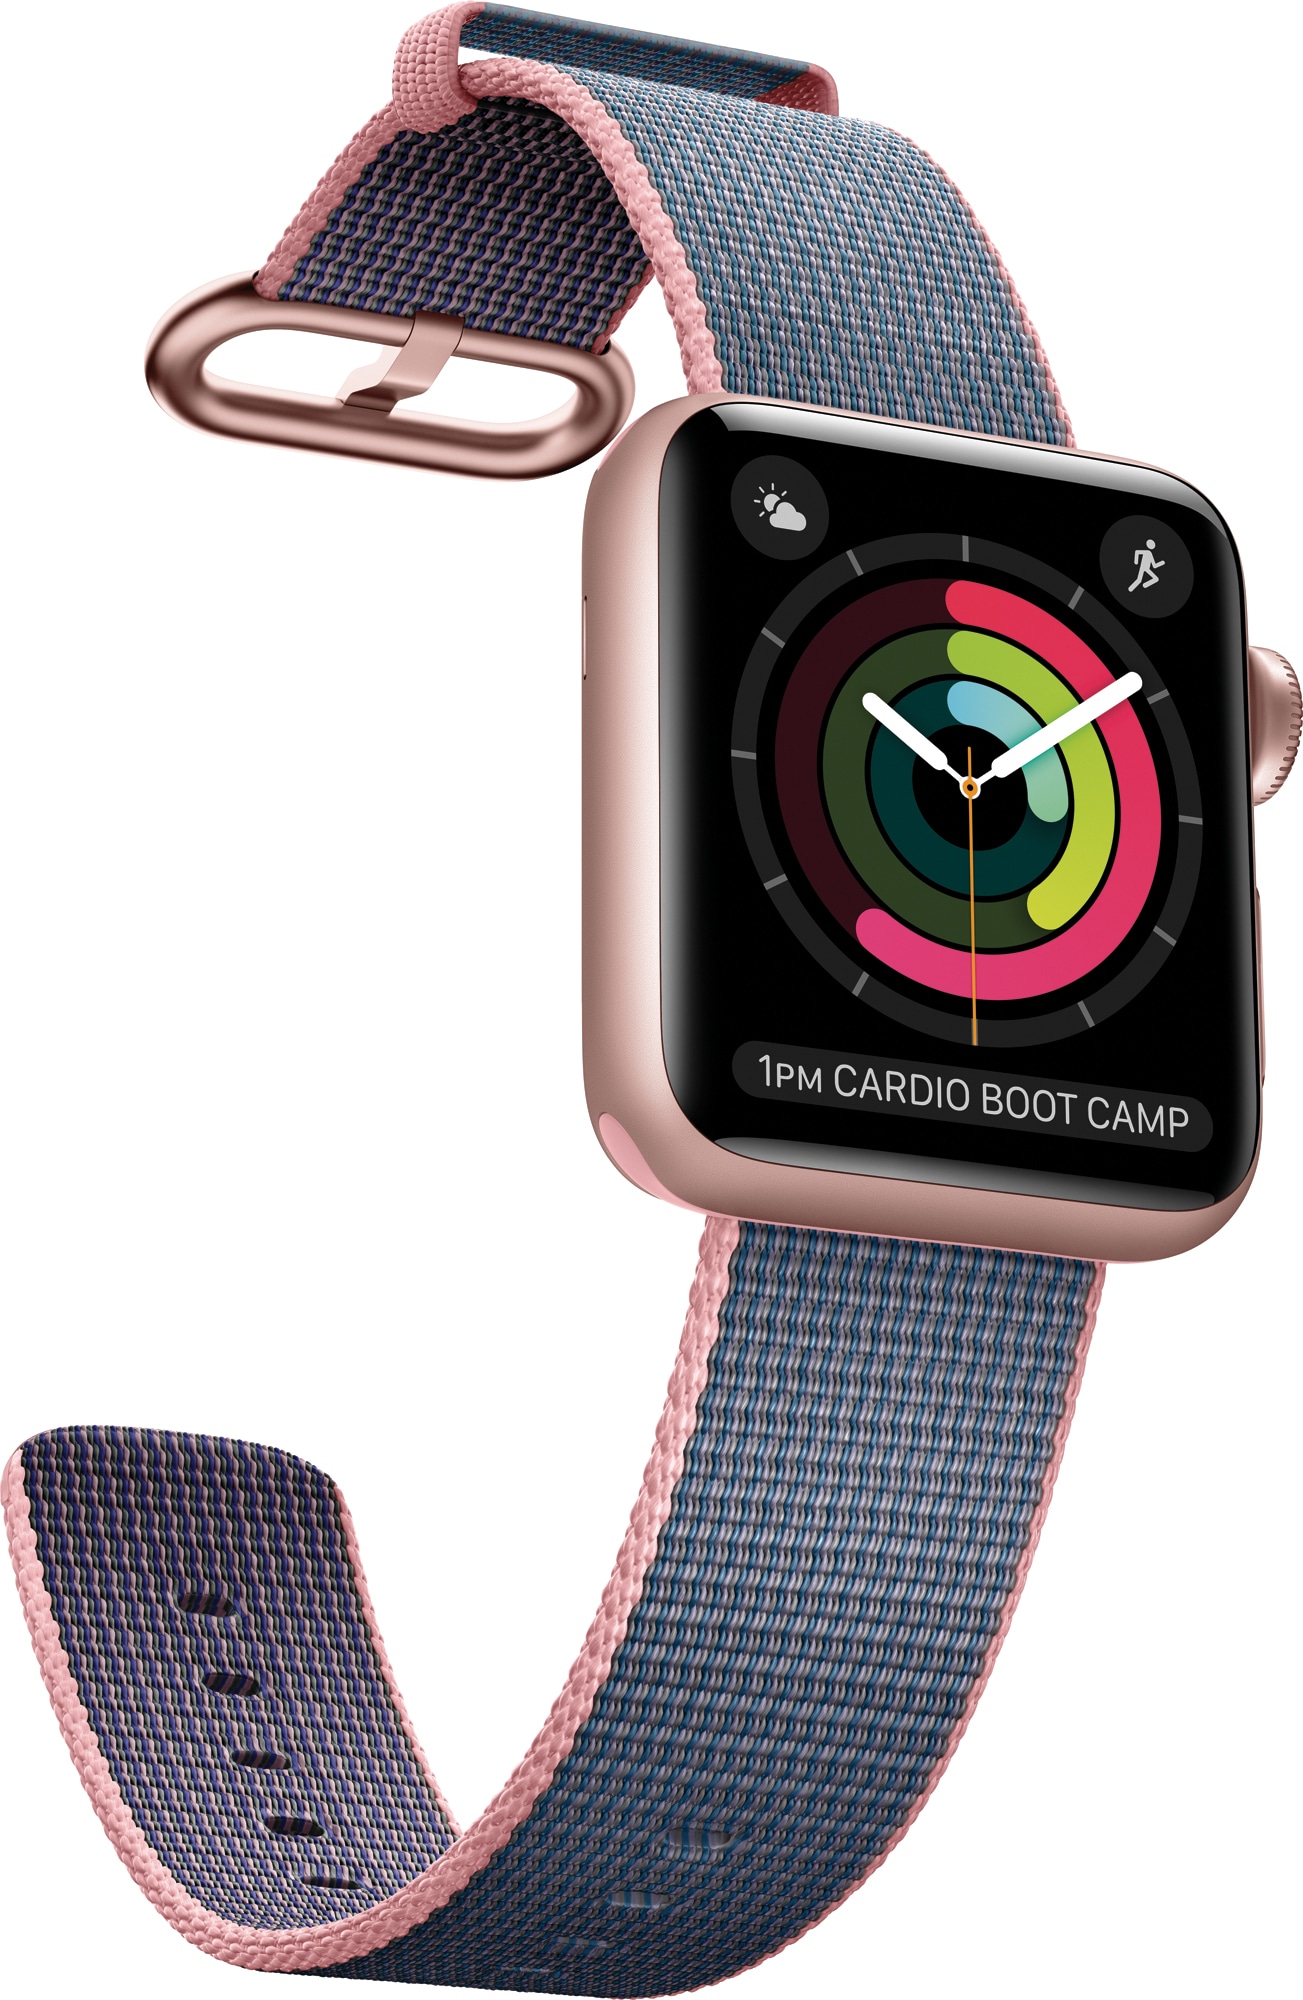 Apple Watch Series 2 rose gold with blue and pink nylon weave strap